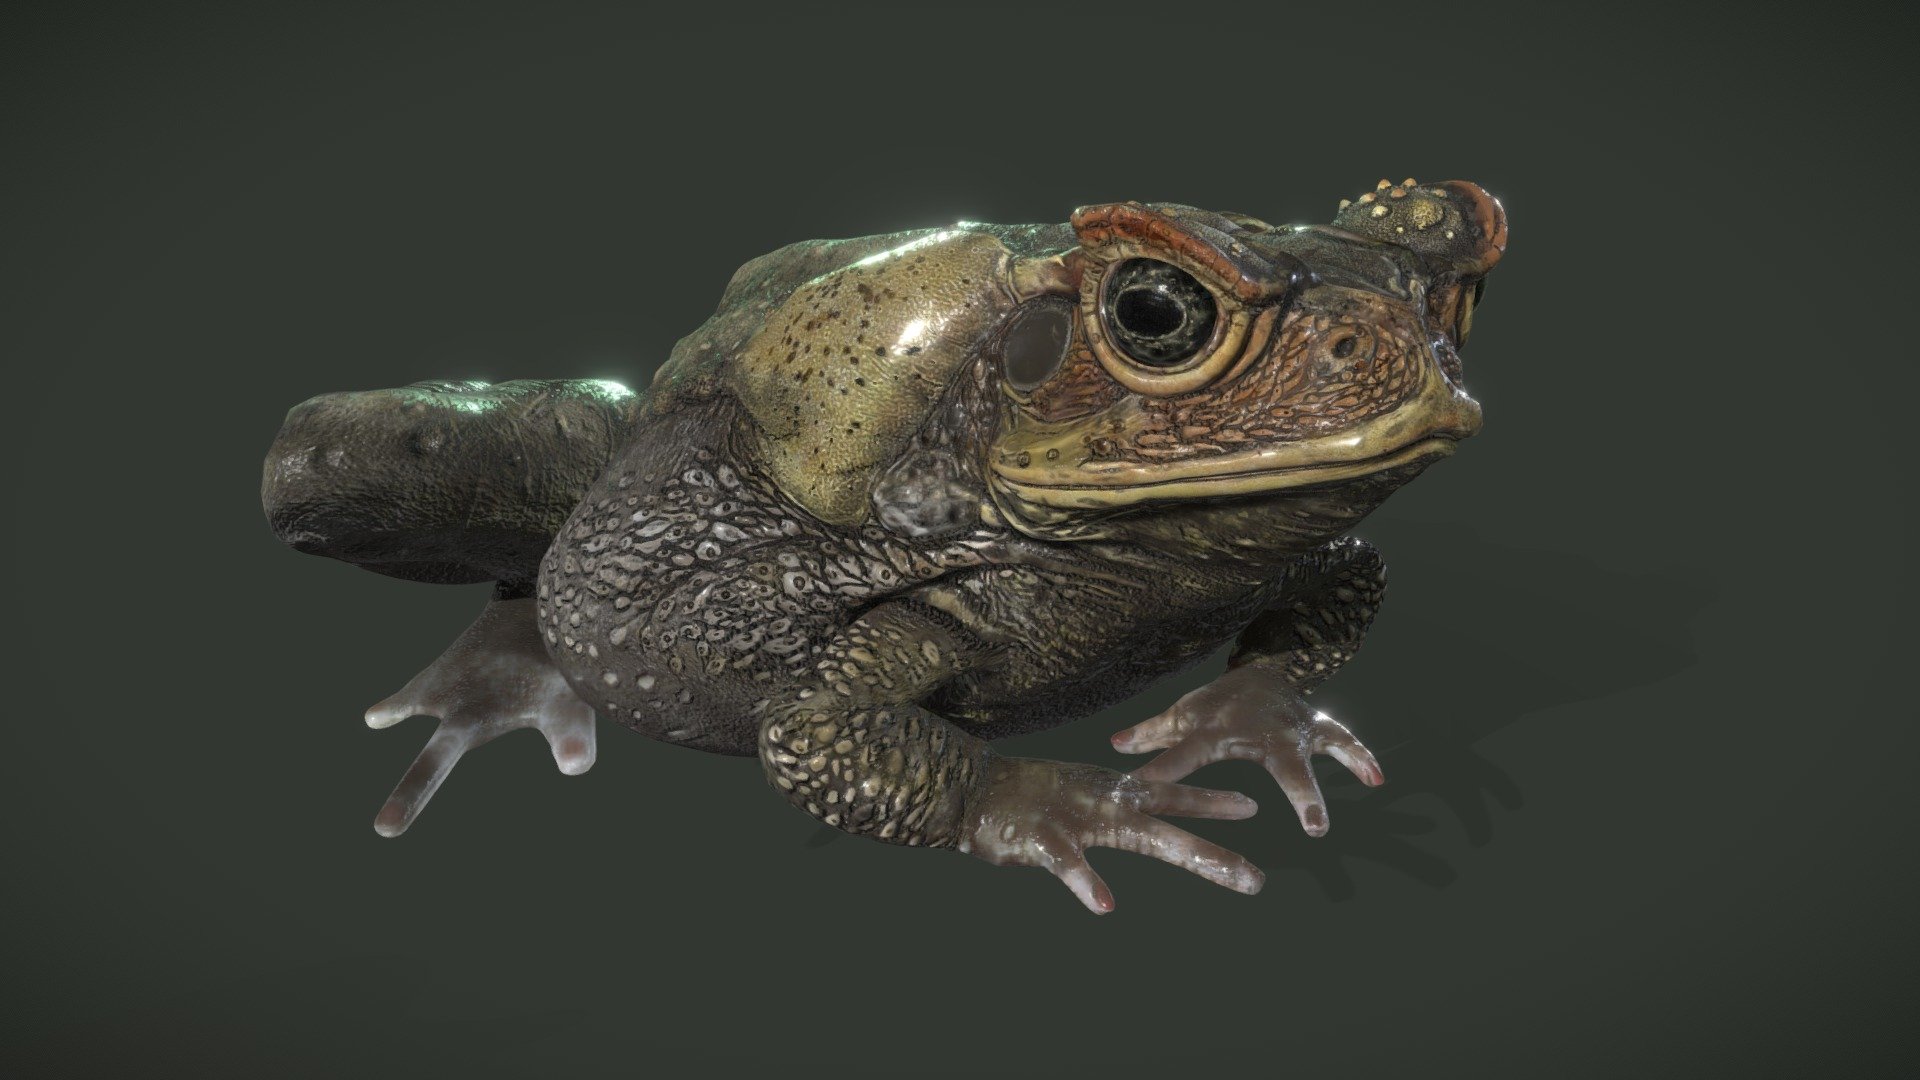 THIS ASSET IS NOW FOR SALE!

The file includes: 
    - A .zip with all the textures needed for the toad
    - An .fbx file with showcased animations
    - An .obj file 
    - A .blend scene with the rigged toad and an unposed toad and the showcased animation
    - A Unity Scene (or .unitypackage depending on the website)

1.0
    - Initial Commit

1.1
    - Added Unity Scene
    - Folder Cleanup
    - General cleanup to .blend scene, especially removing loose files and better support for Eevee/Cycles

For a better idea of what's coming with this package, follow the link below :
https://www.artstation.com/artwork/24gZx - Cane Toad 1.1 - Buy Royalty Free 3D model by phi (@o0i0o) 3d model